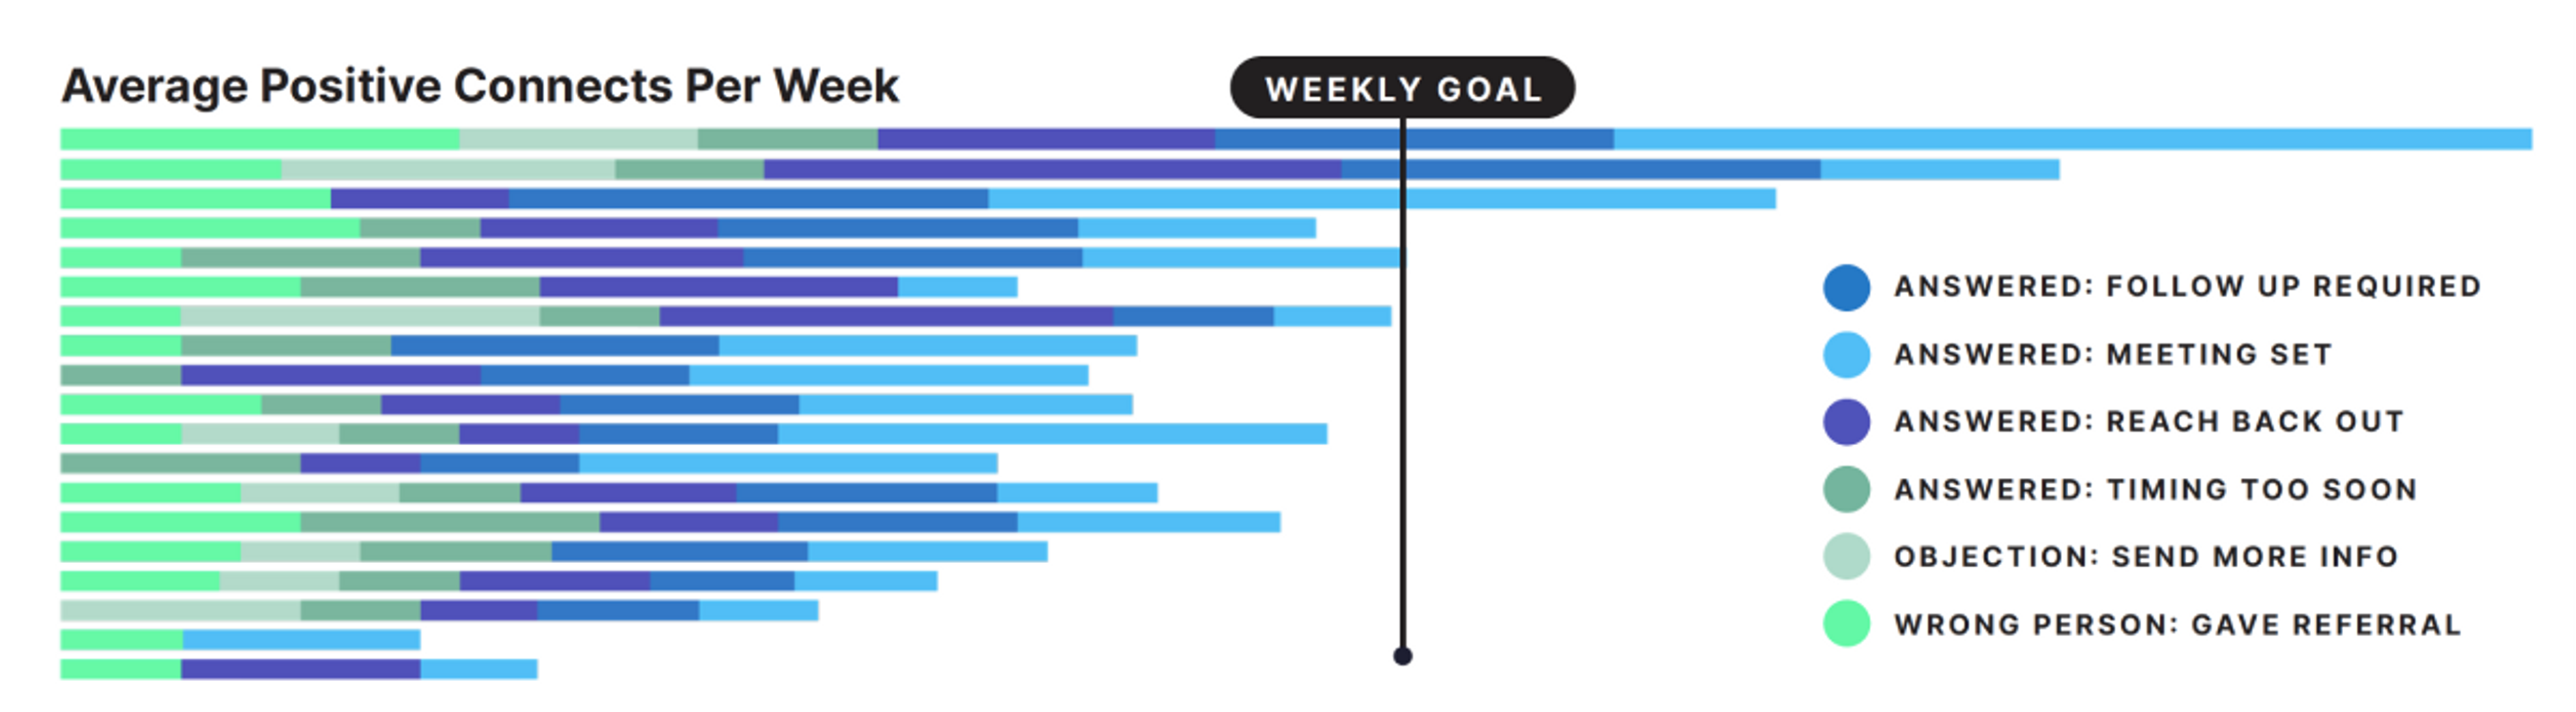 Sigma's average positive connects per week to their weekly goal